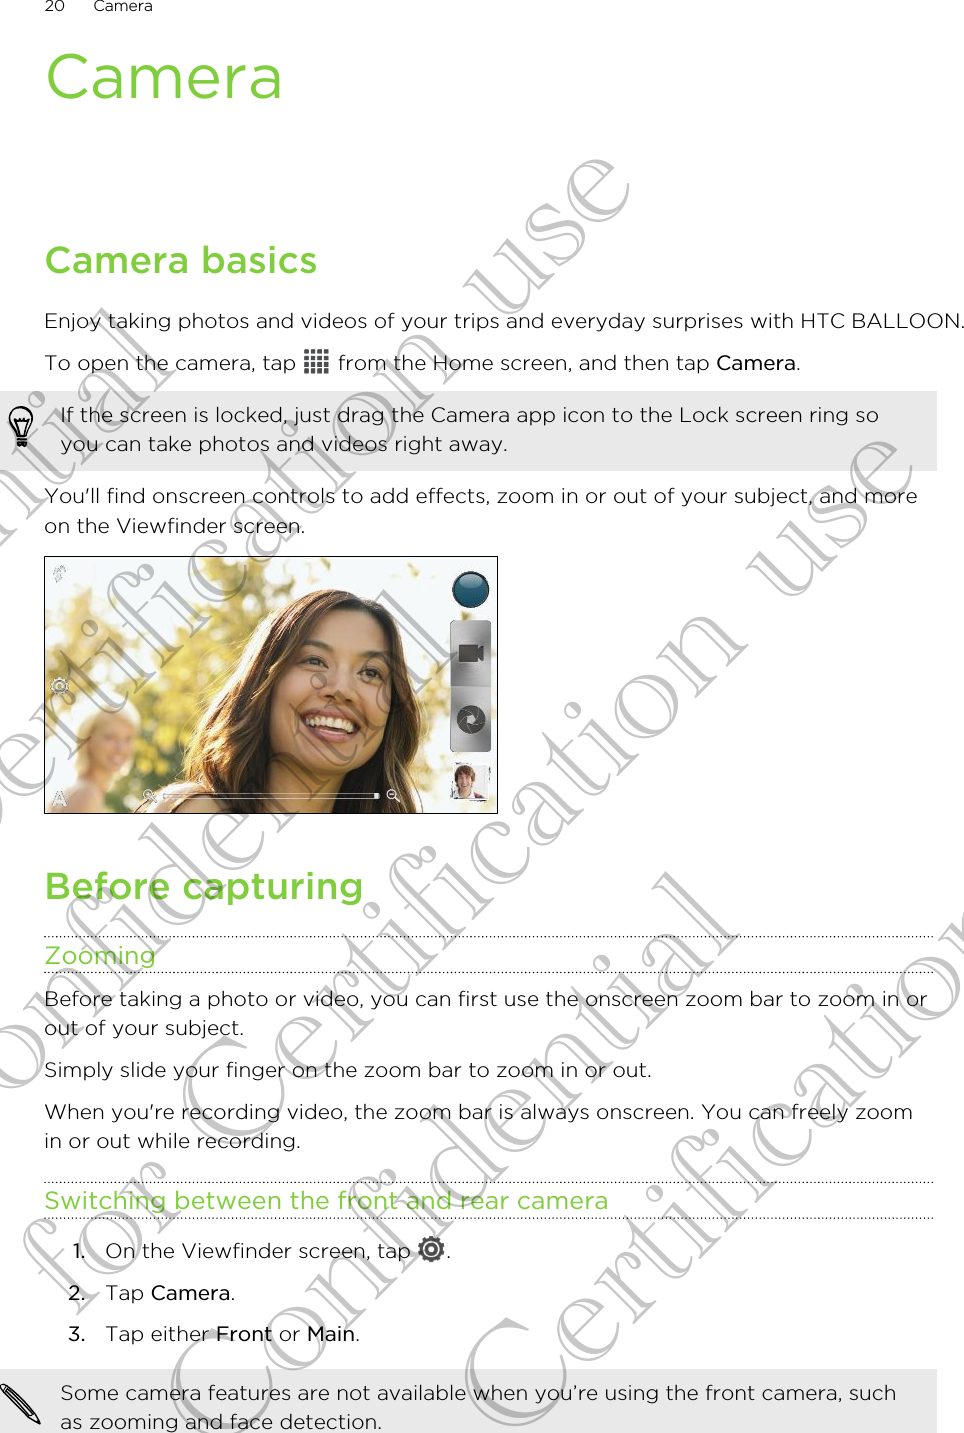 CameraCamera basicsEnjoy taking photos and videos of your trips and everyday surprises with HTC BALLOON.To open the camera, tap   from the Home screen, and then tap Camera. If the screen is locked, just drag the Camera app icon to the Lock screen ring soyou can take photos and videos right away.You&apos;ll find onscreen controls to add effects, zoom in or out of your subject, and moreon the Viewfinder screen.Before capturingZoomingBefore taking a photo or video, you can first use the onscreen zoom bar to zoom in orout of your subject.Simply slide your finger on the zoom bar to zoom in or out.When you&apos;re recording video, the zoom bar is always onscreen. You can freely zoomin or out while recording.Switching between the front and rear camera1. On the Viewfinder screen, tap  .2. Tap Camera.3. Tap either Front or Main.Some camera features are not available when you’re using the front camera, suchas zooming and face detection.20 CameraConfidential for Certification use Confidential for Certification use Confidential for Certification use 